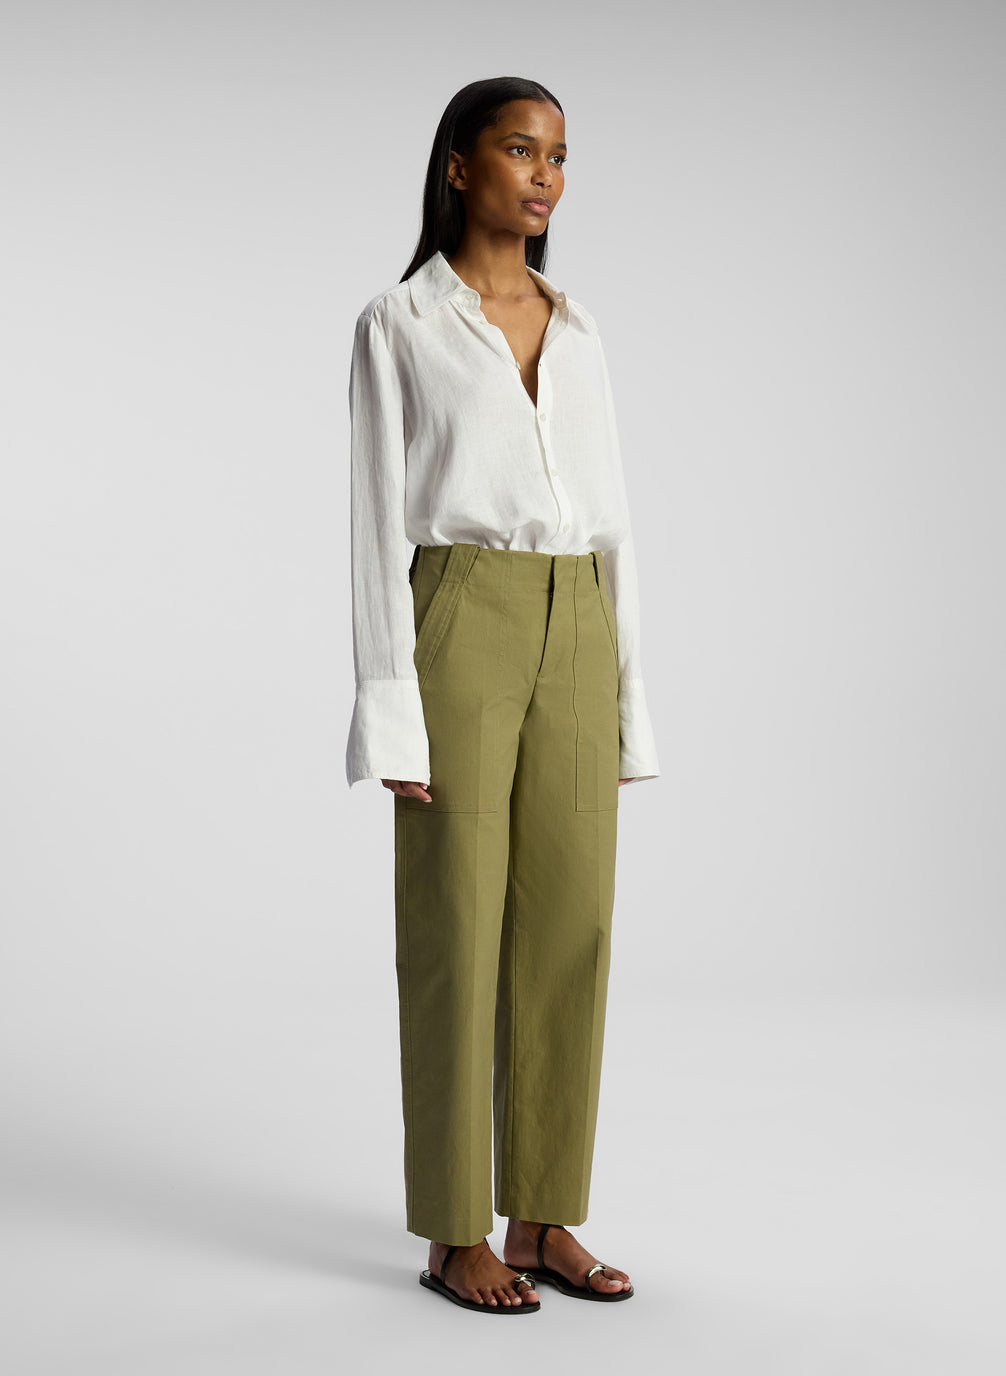 side view of woman wearing white button down shirt and olive pants